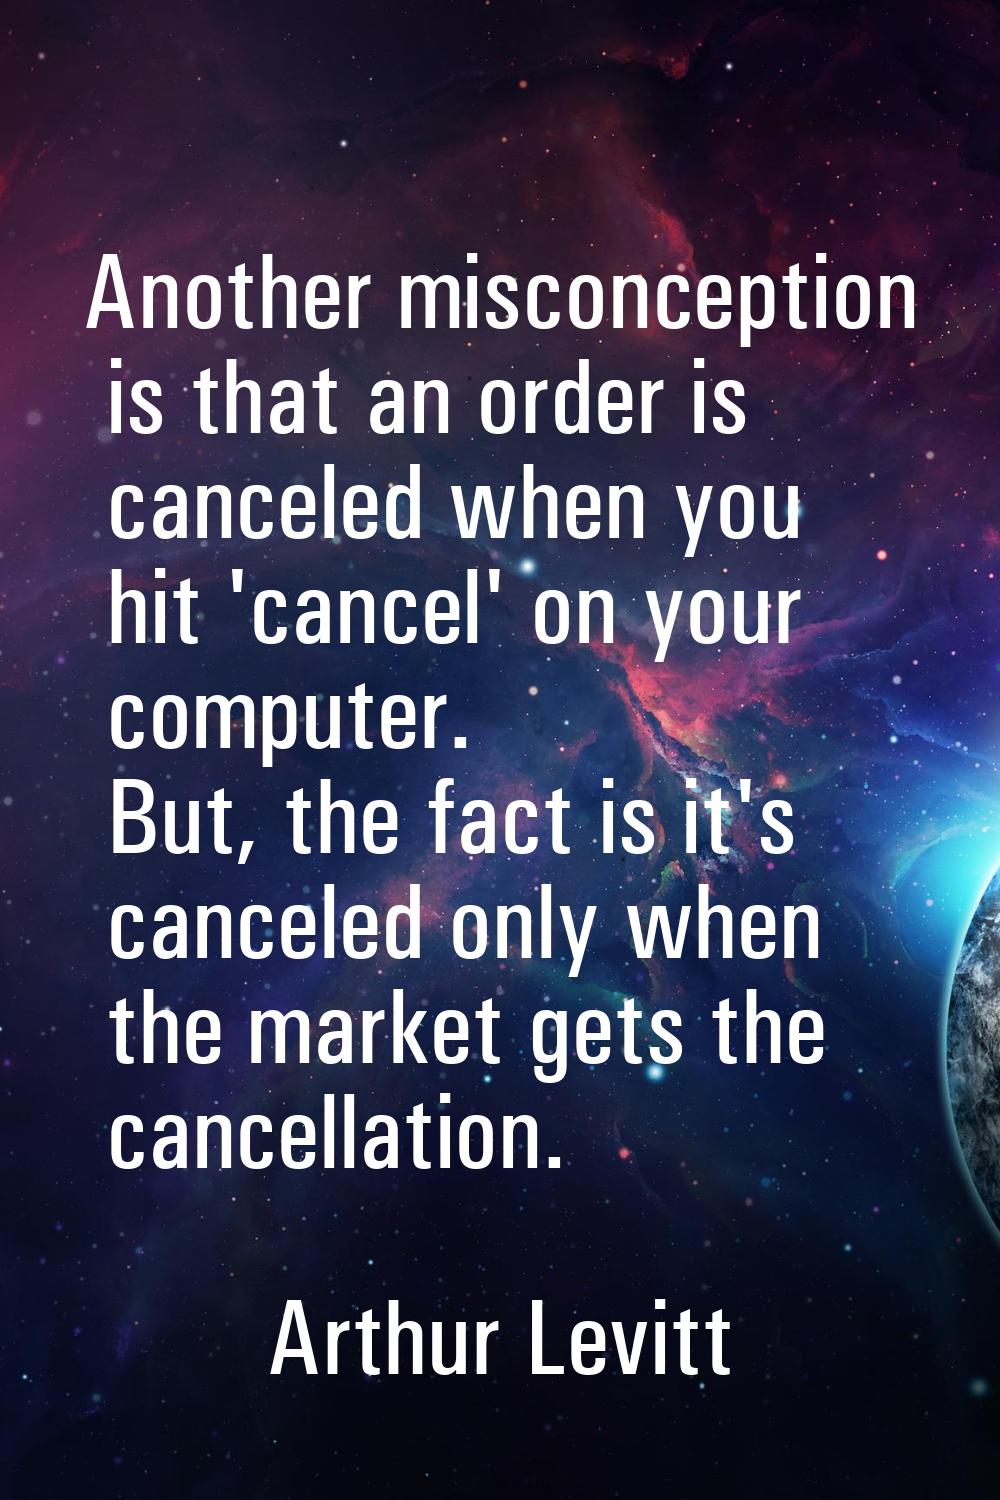 Another misconception is that an order is canceled when you hit 'cancel' on your computer. But, the